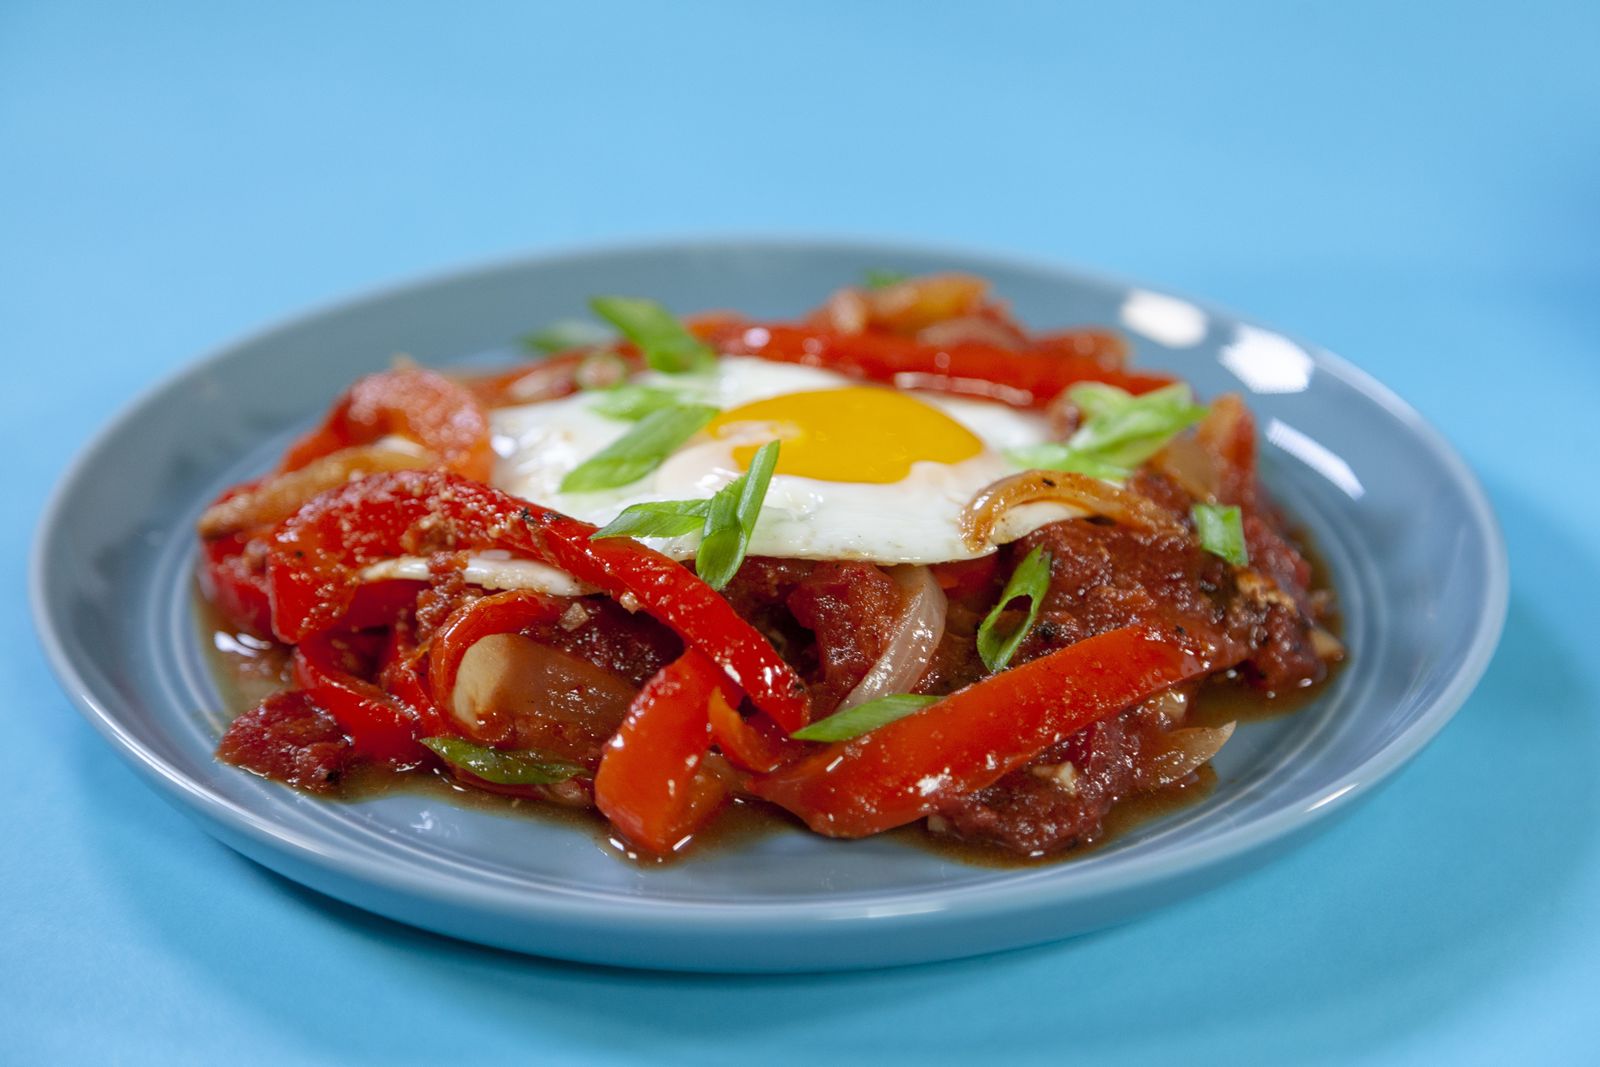 Shakshouka, a globally-inspired breakfast item, is a Tunisian/Israeli dish made of poached eggs, tomato sauce, onions, and chili peppers. Spiced with cumin, paprika, cayenne pepper and nutmeg, it is among 2019's food trends.